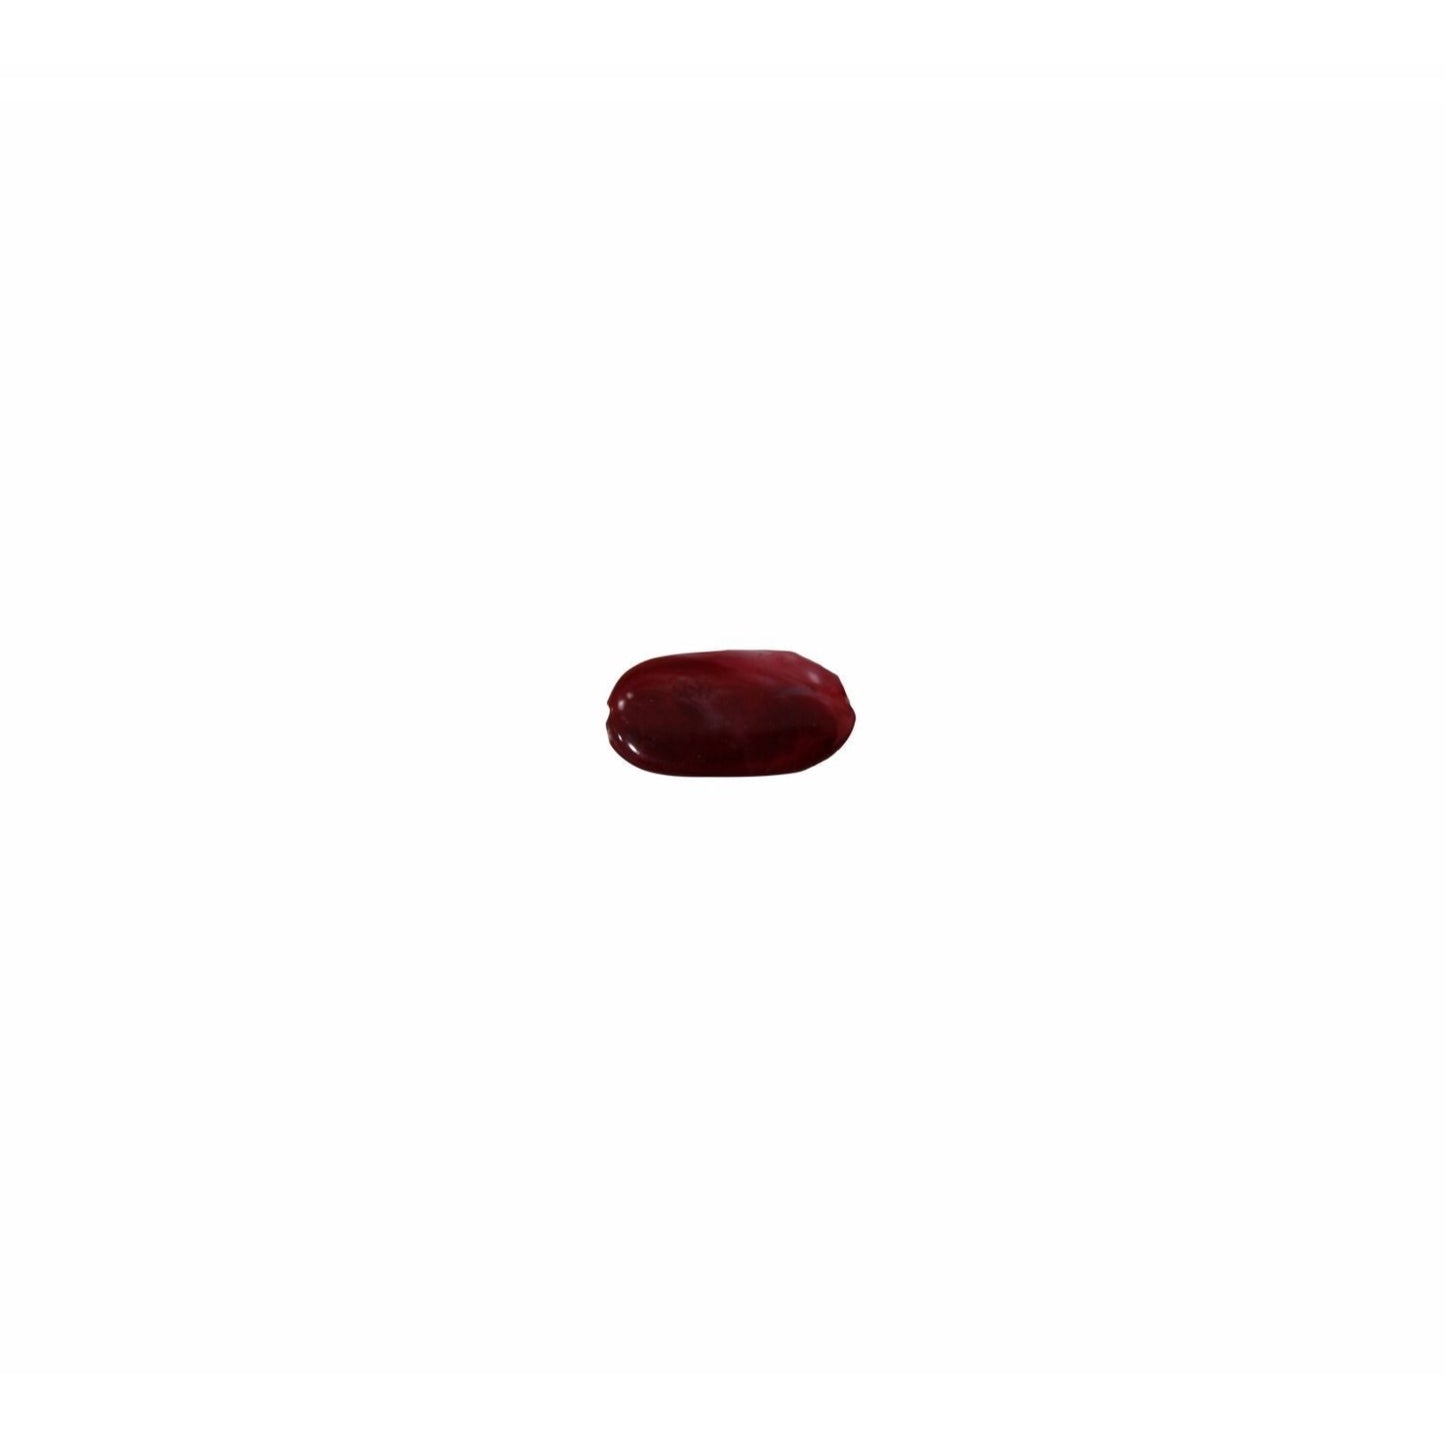 Indian Petals Fluid Red Resin Tablet Cabochons Motif for Craft or Decoration - 12470, Dark Red